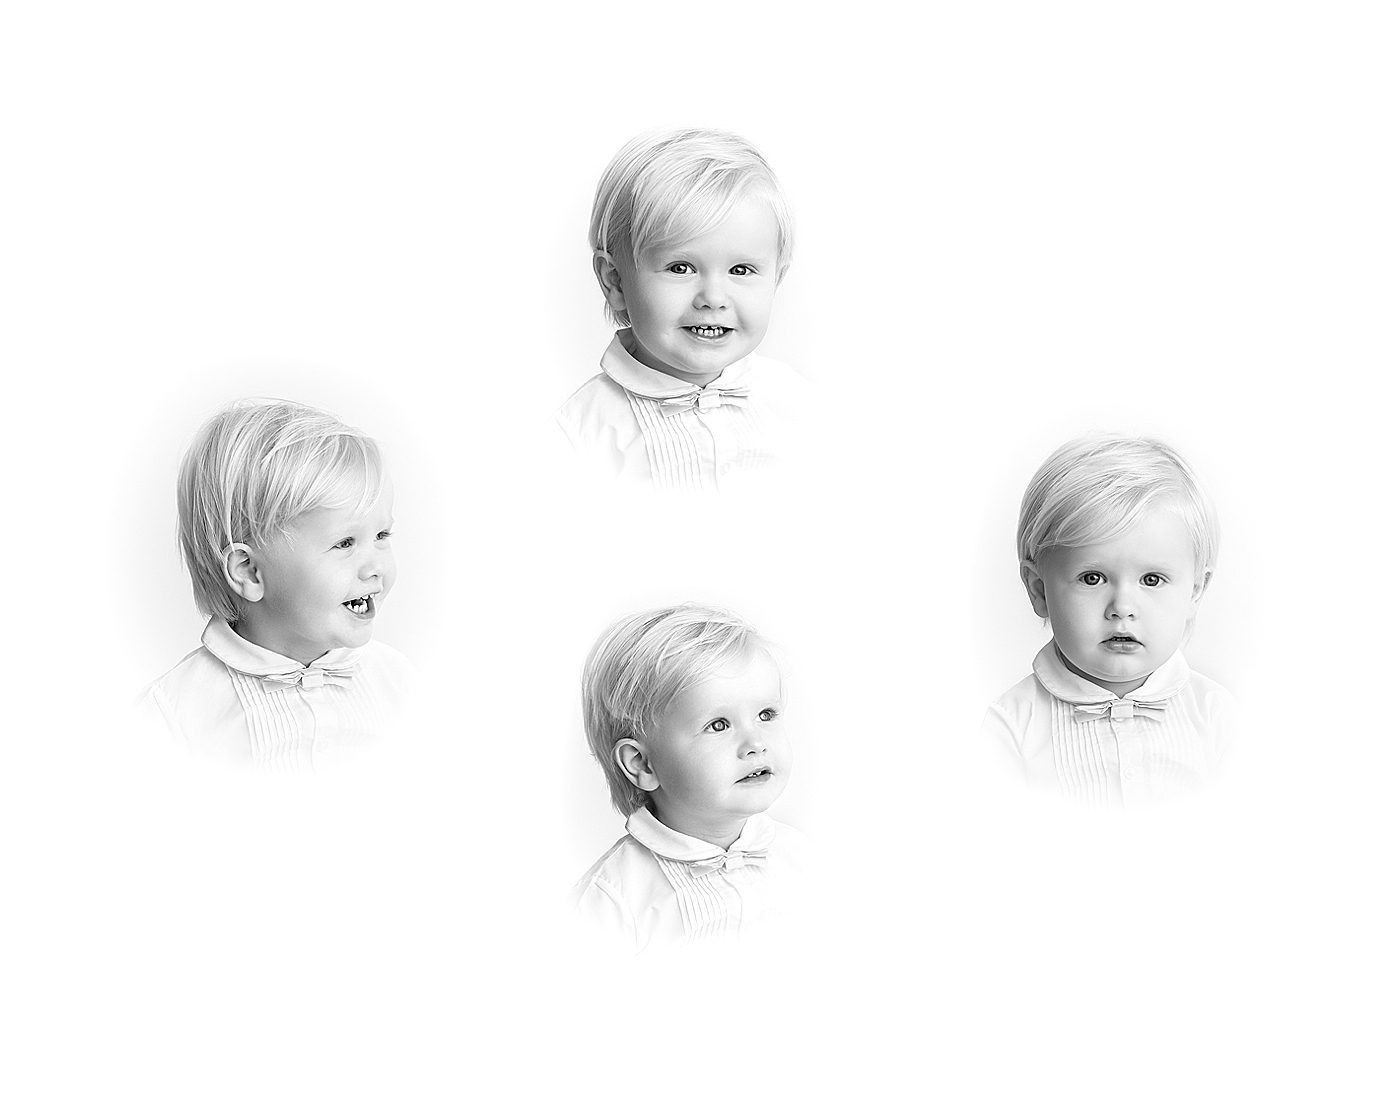 black and white heirloom photograph collage of a 2 year old boy in Minneapolis